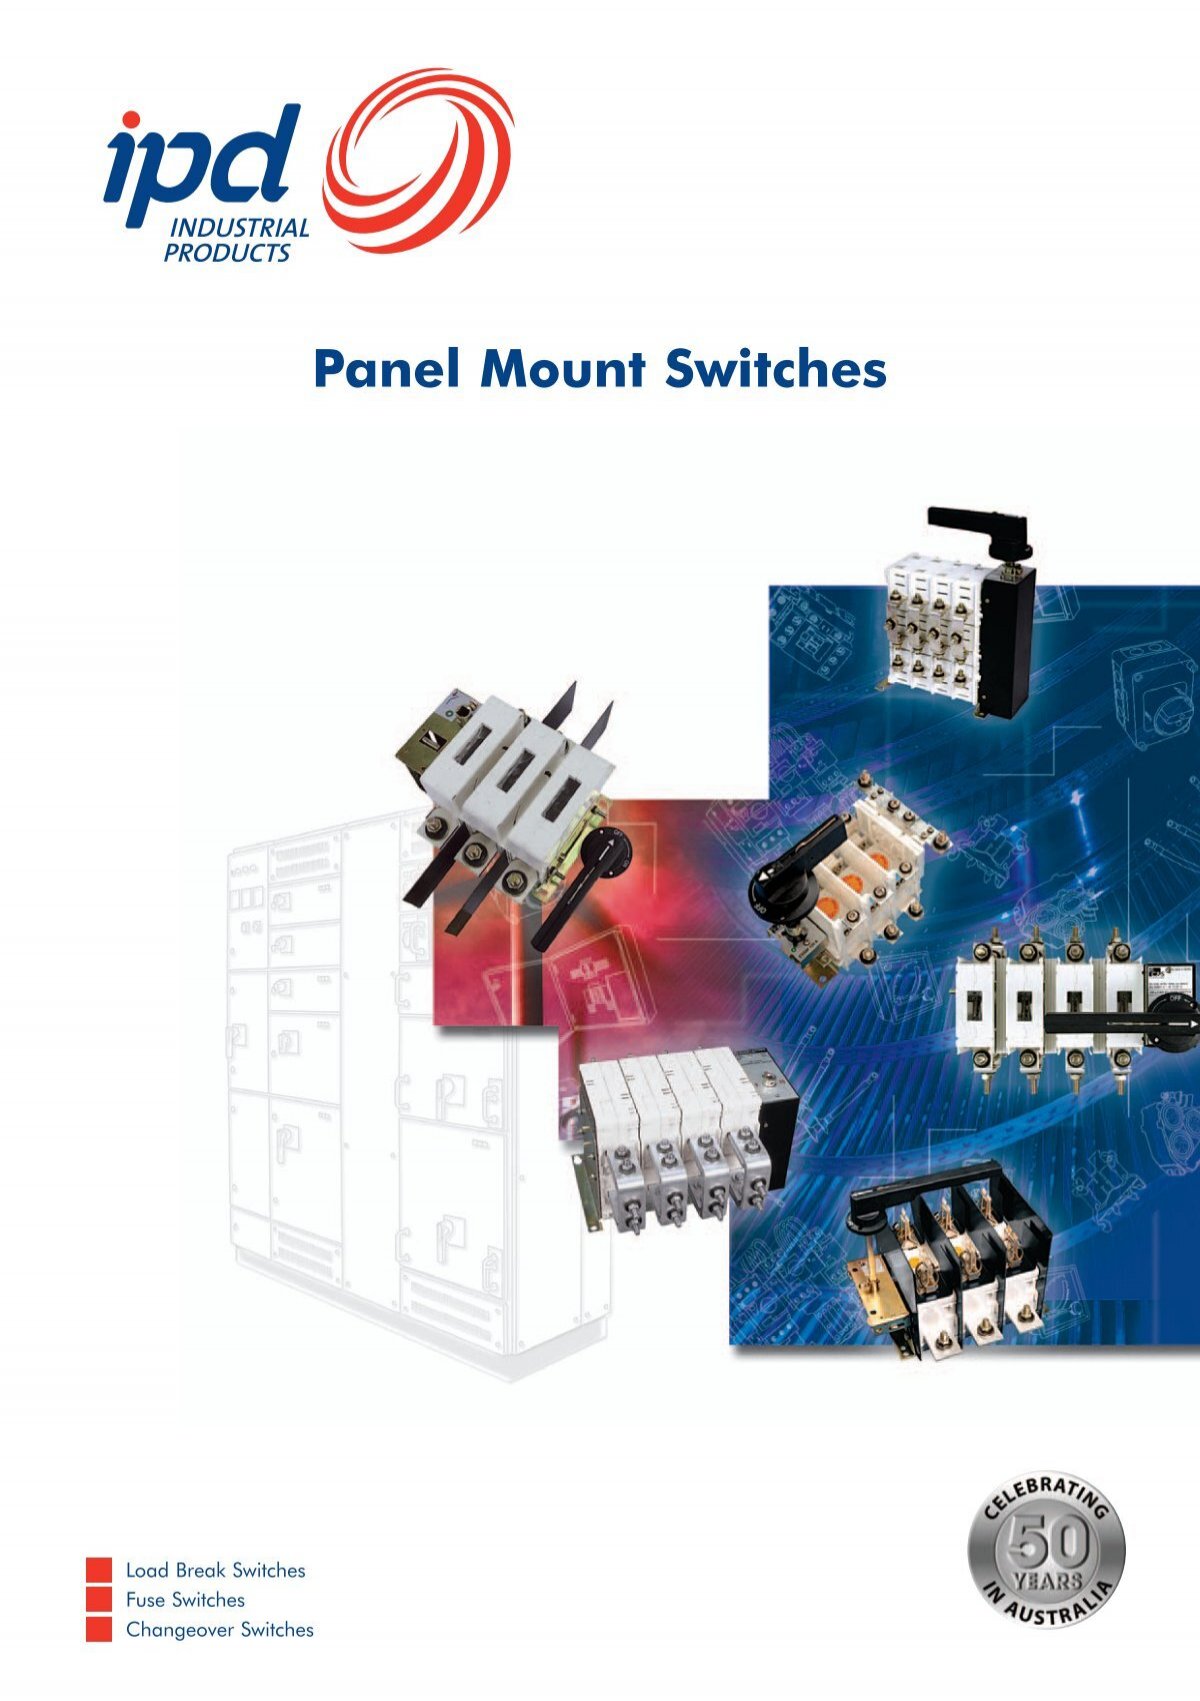 Panel Mount Switches - IPD The